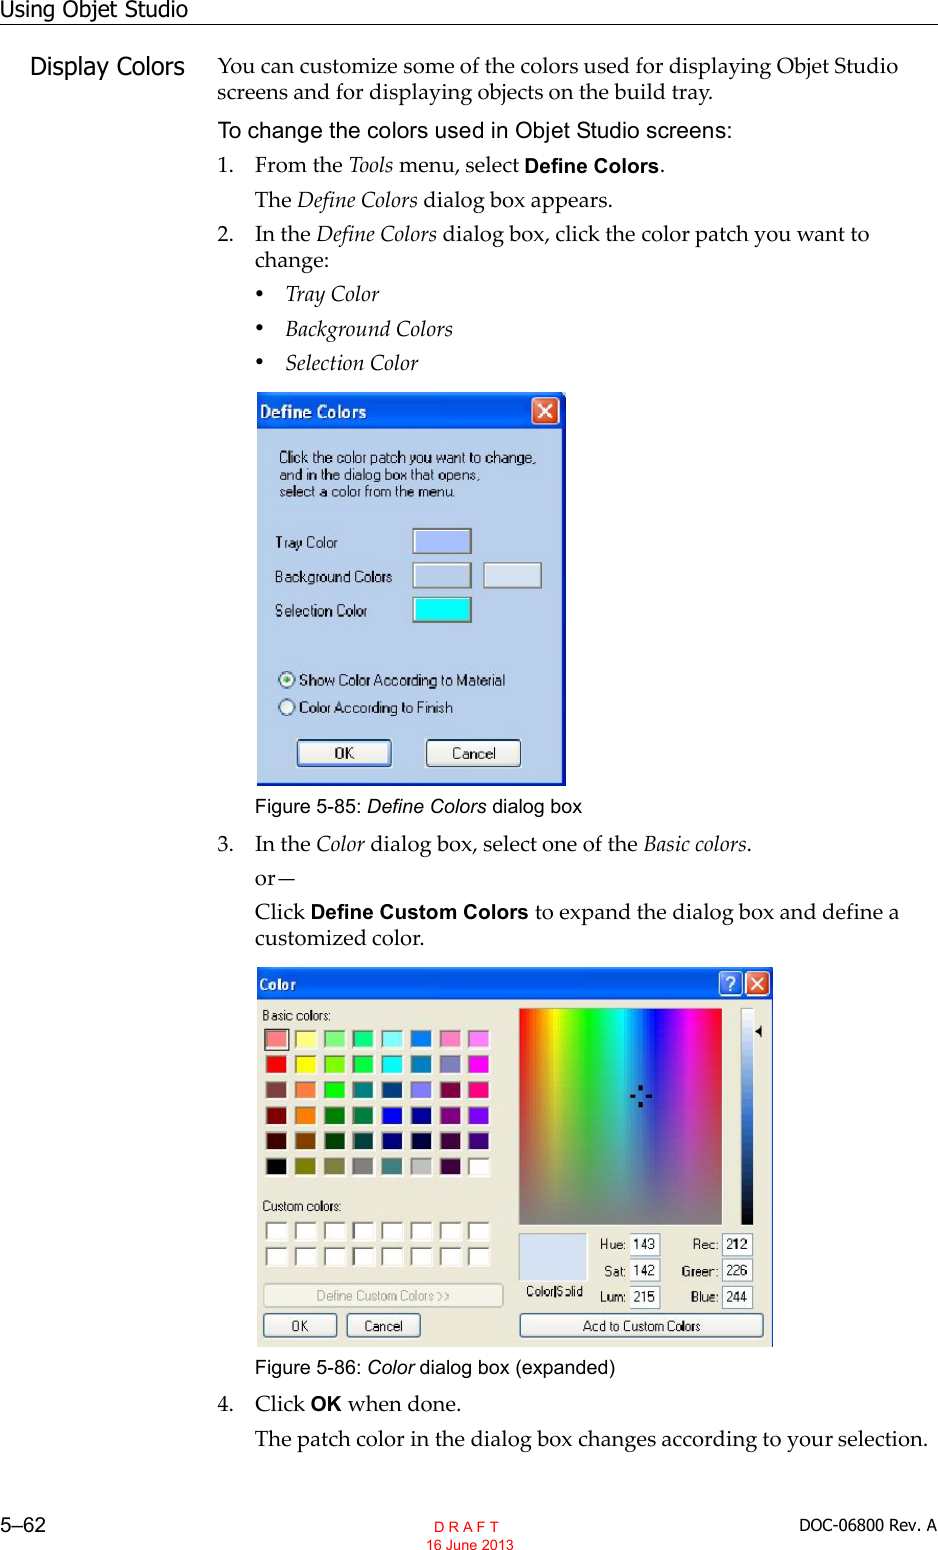 Using Objet Studio5–62 DOC-06800 Rev. ADisplay Colors You can customize some of the colors used for displaying Objet Studioscreens and for displaying objects on the build tray.To change the colors used in Objet Studio screens:1. From the Tools menu, select Define Colors.The Define Colors dialog box appears.2. In the Define Colors dialog box, click the color patch you want tochange:•Tray Color•Background Colors•Selection ColorFigure 5-85: Define Colors dialog box3. In the Color dialog box, select one of the Basic colors.orClick Define Custom Colors to expand the dialog box and define acustomized color.Figure 5-86: Color dialog box (expanded)4. Click OK when done.The patch color in the dialog box changes according to your selection.  D R A F T 16 June 2013